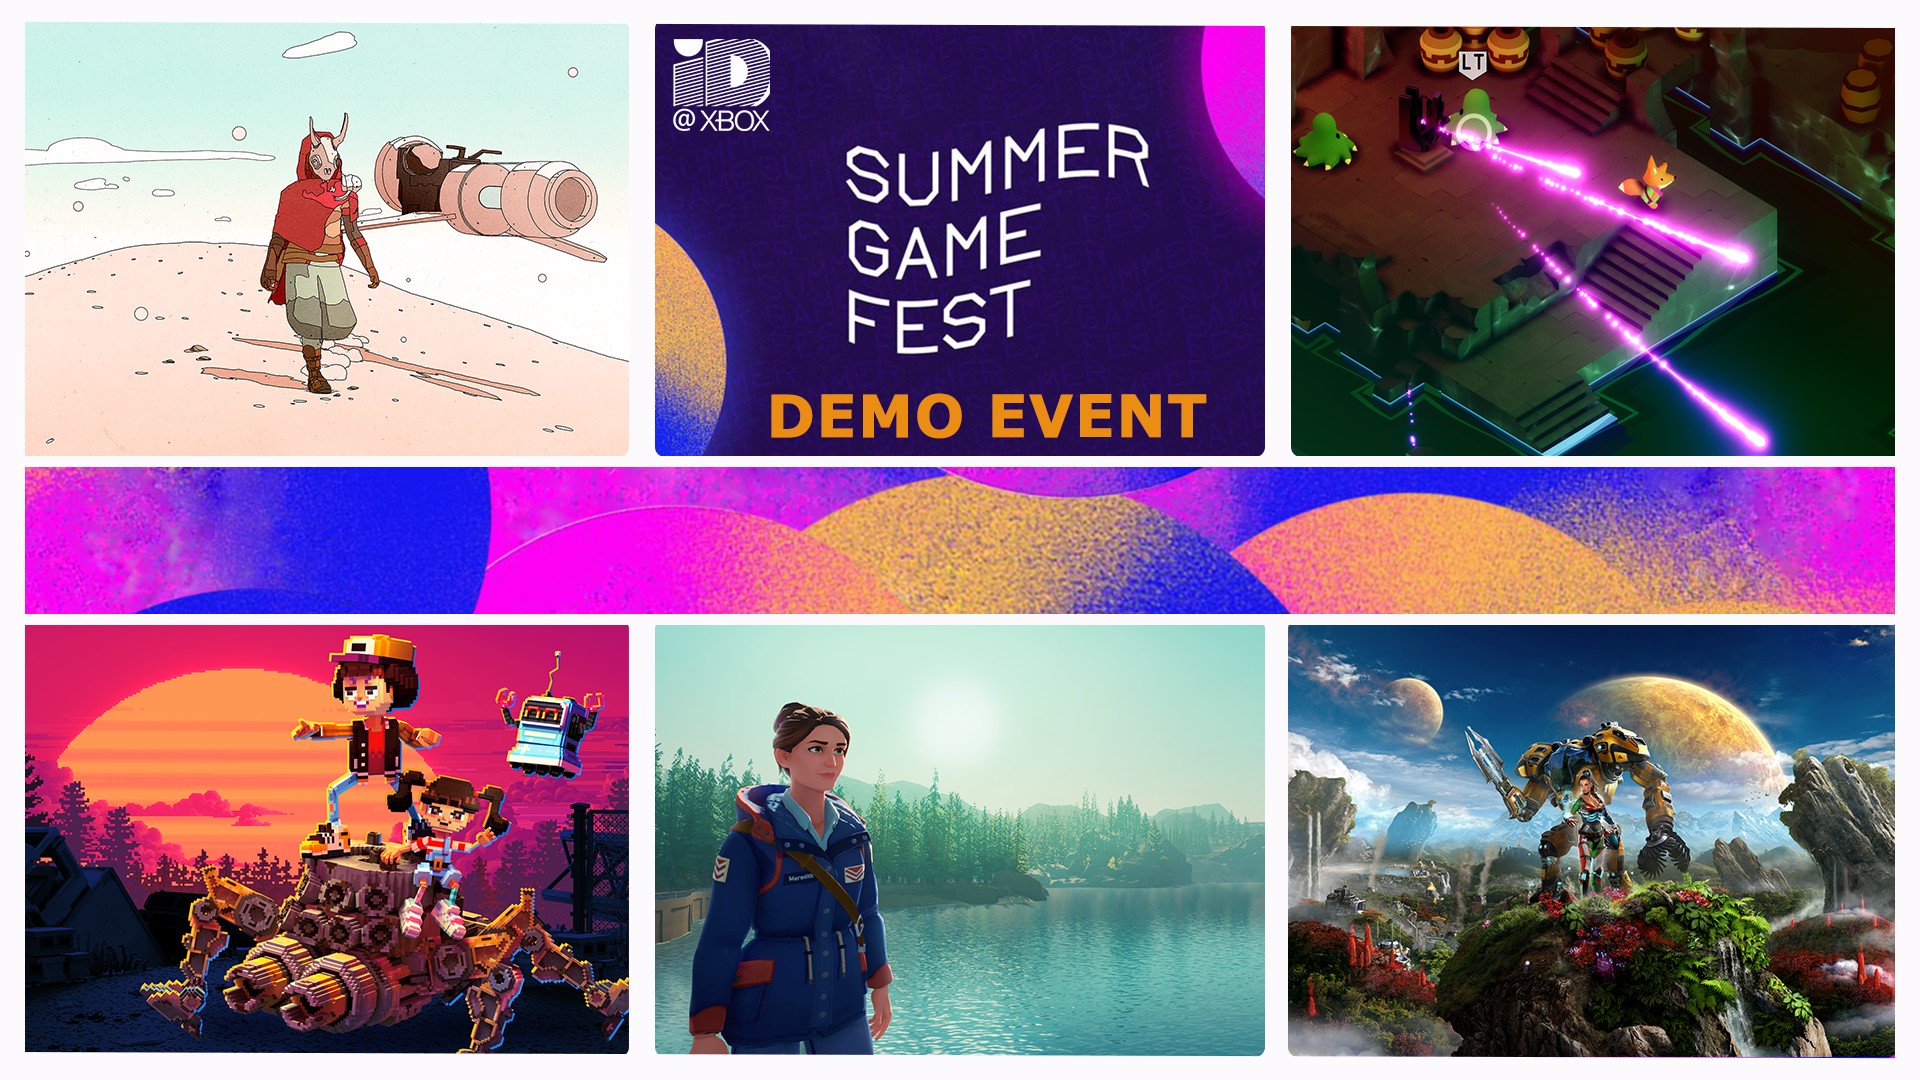 Our Second Summer Game Fest Demo Event Coming June 15 to an Xbox Near